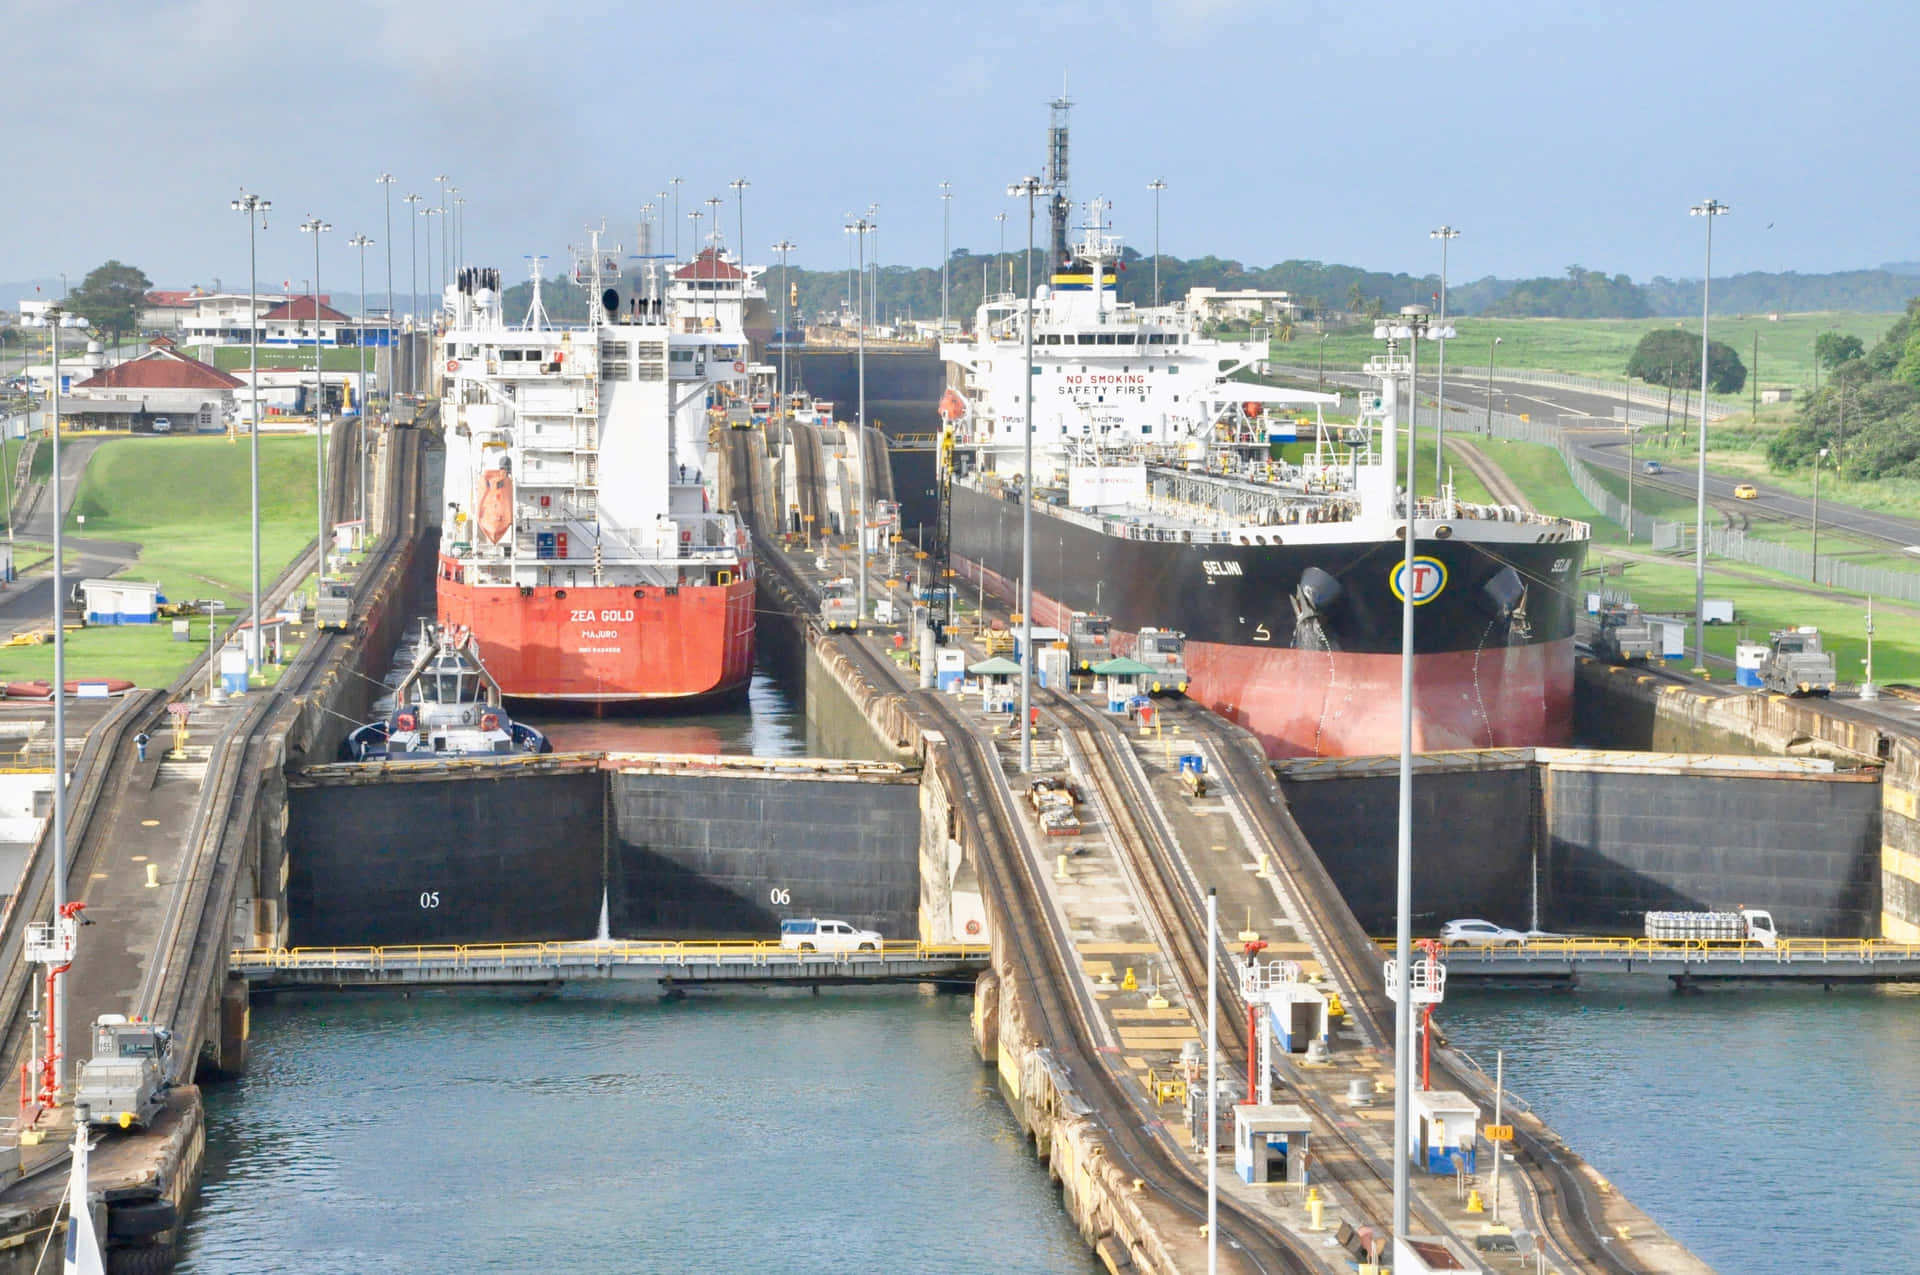 Caption: The Masterpiece of Engineering - Two Giant Ships Voyaging through the Panama Canal Wallpaper